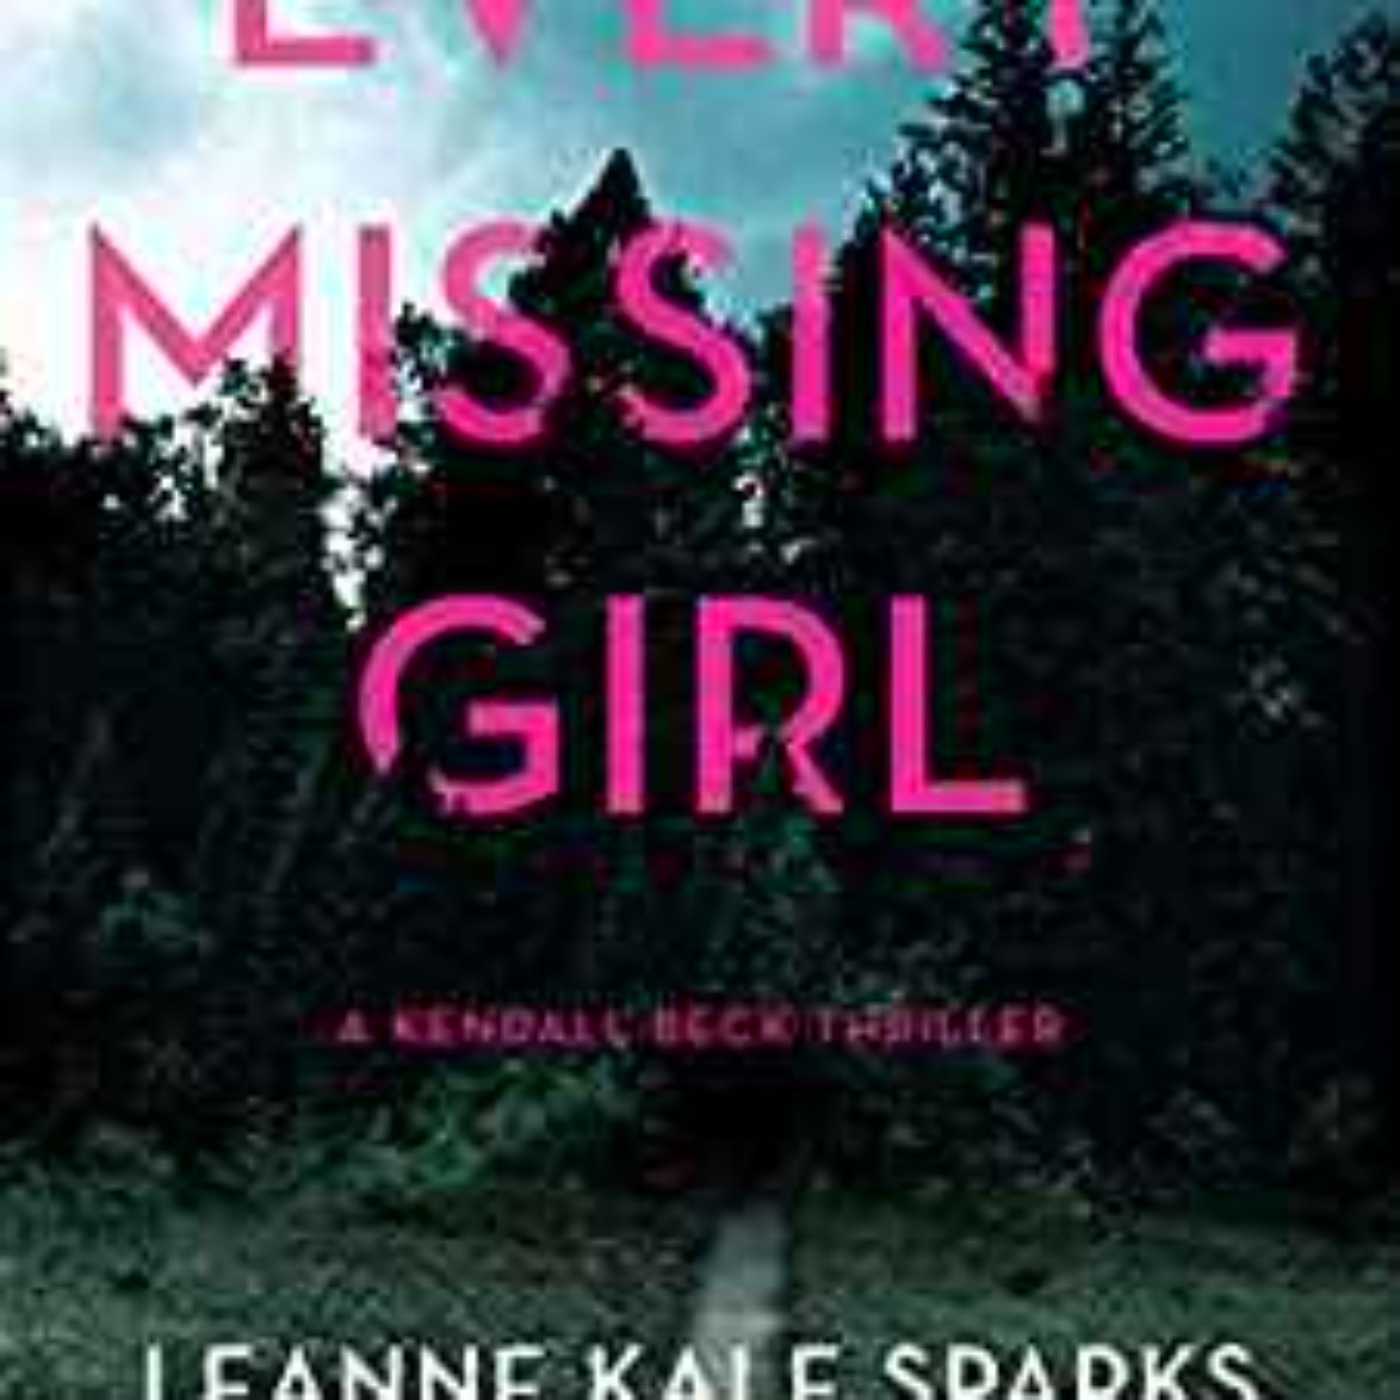 Leanne Kale Sparks - Every Missing Girl